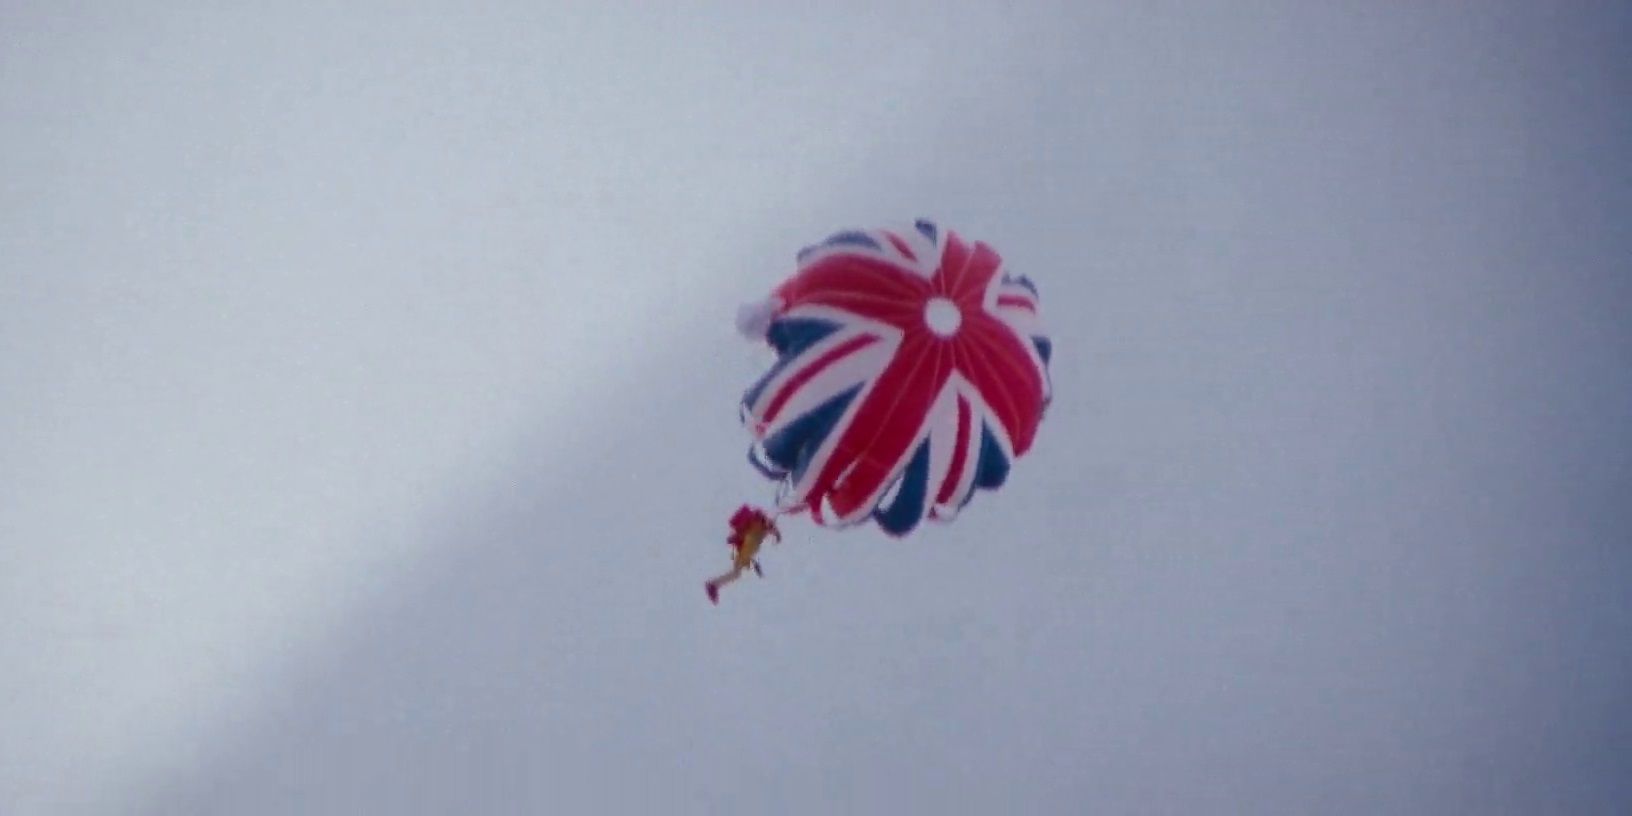 The opening parachute jump in The Spy Who Loved Me